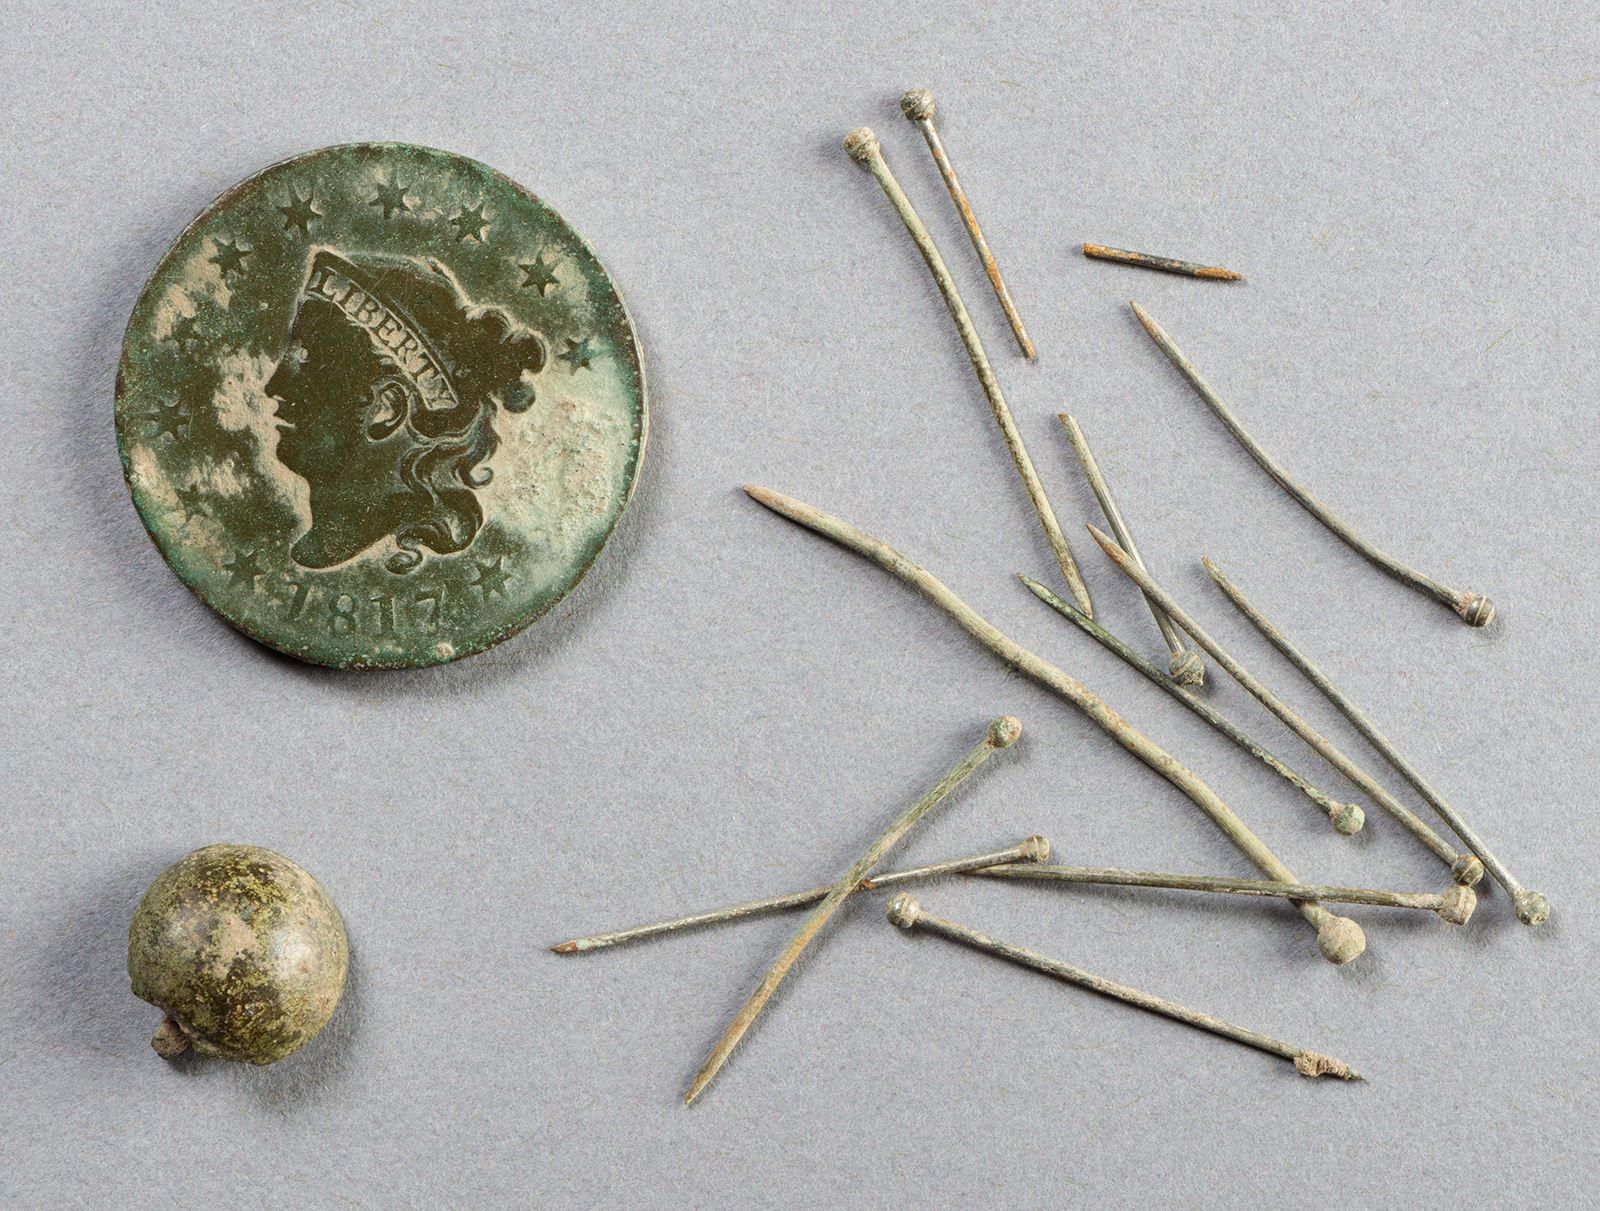 A One Cent coin, button and pins from the First Baptist Church archaeological site in Williamsburg, Virginia. Photo courtesy of Colonial Williamsburg Foundation